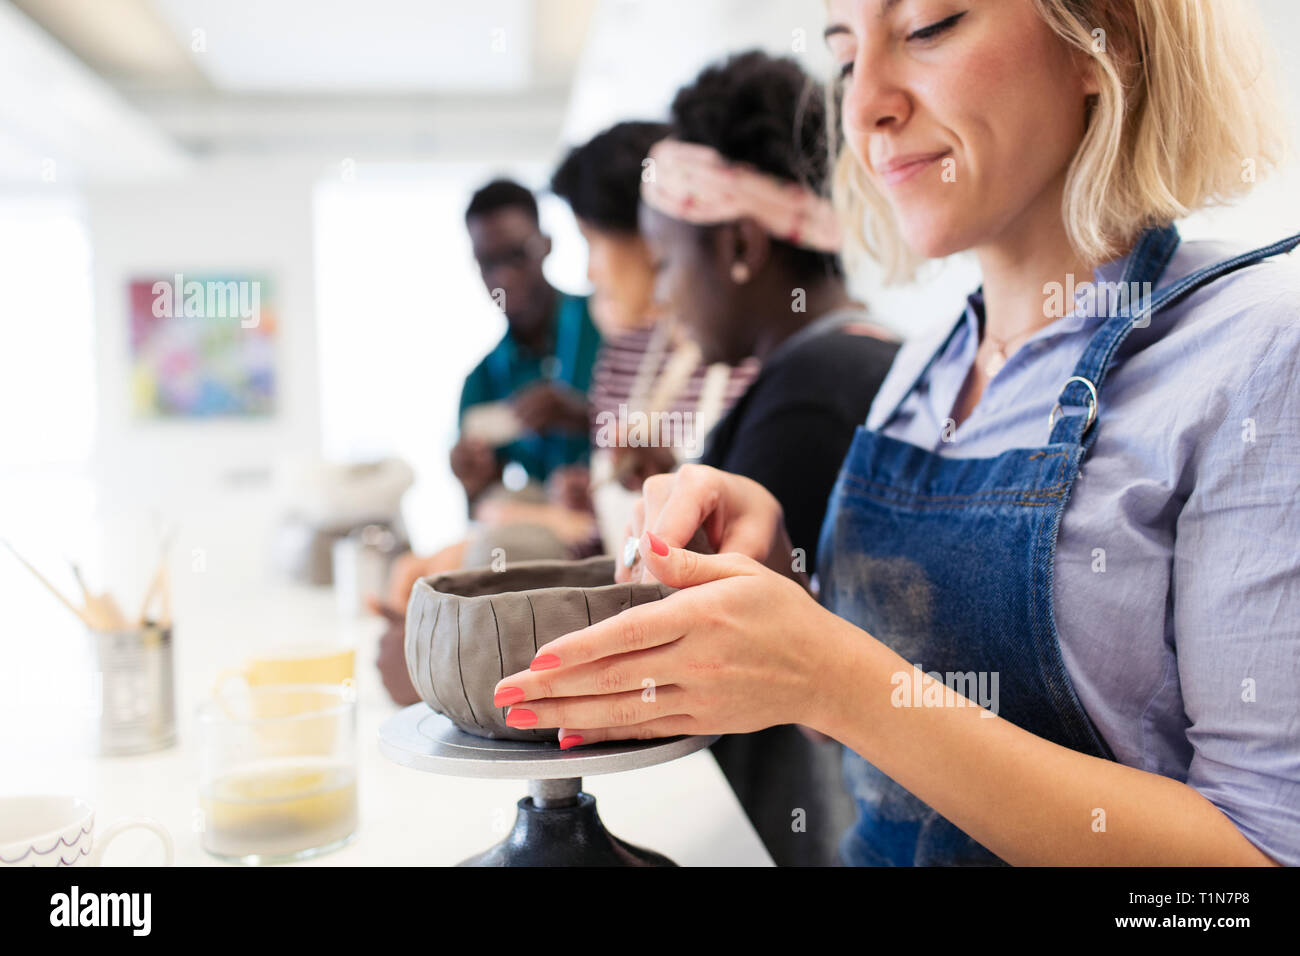 Woman shaping clay bowl in art class Stock Photo